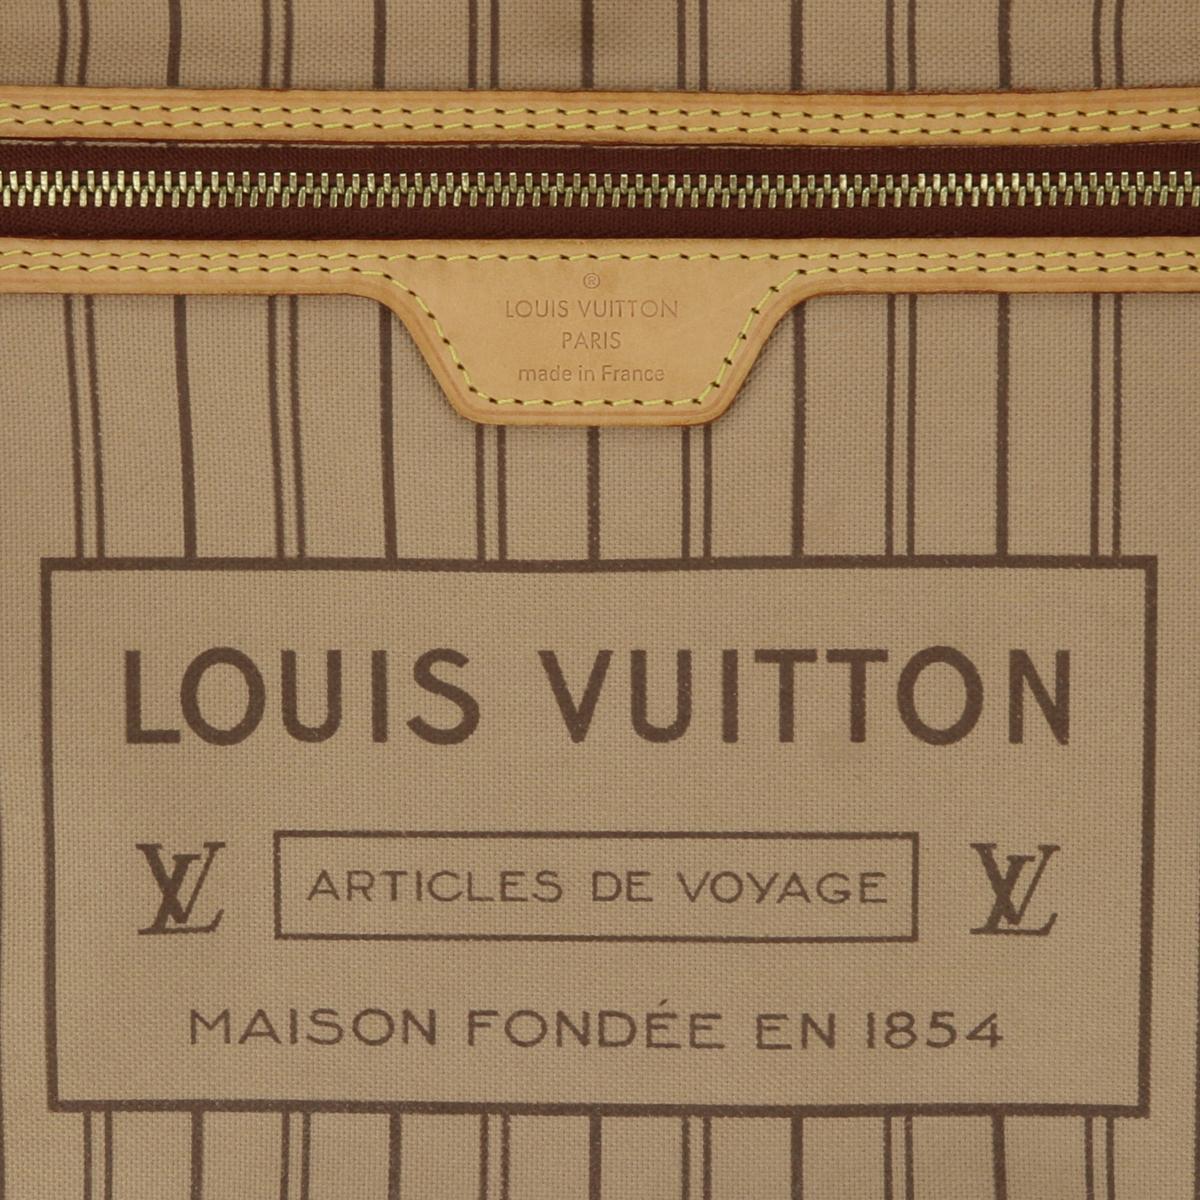 Louis Vuitton Neverfull MM Bag in Monogram with Beige Interior 2016 10